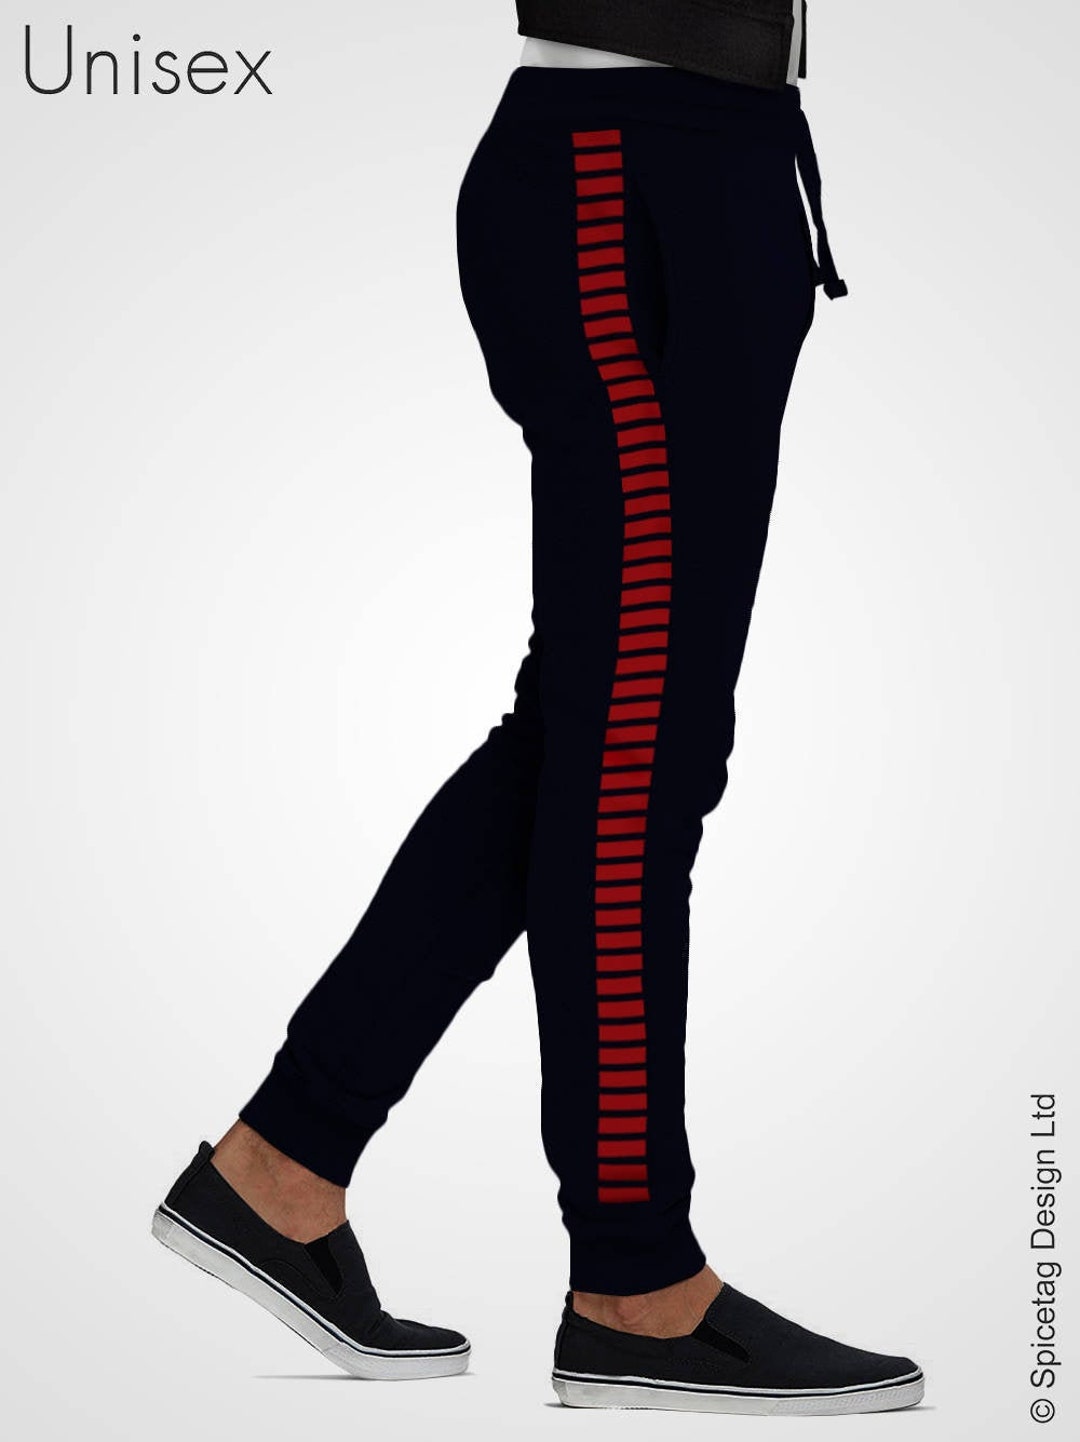 Smuggler Sweatpants Iconic Rebel Solo Joggers Red Stripped Navy Blue Sweats  Star Sweat Pants Mens Womens Tapered Modern Fashion Athleisure 